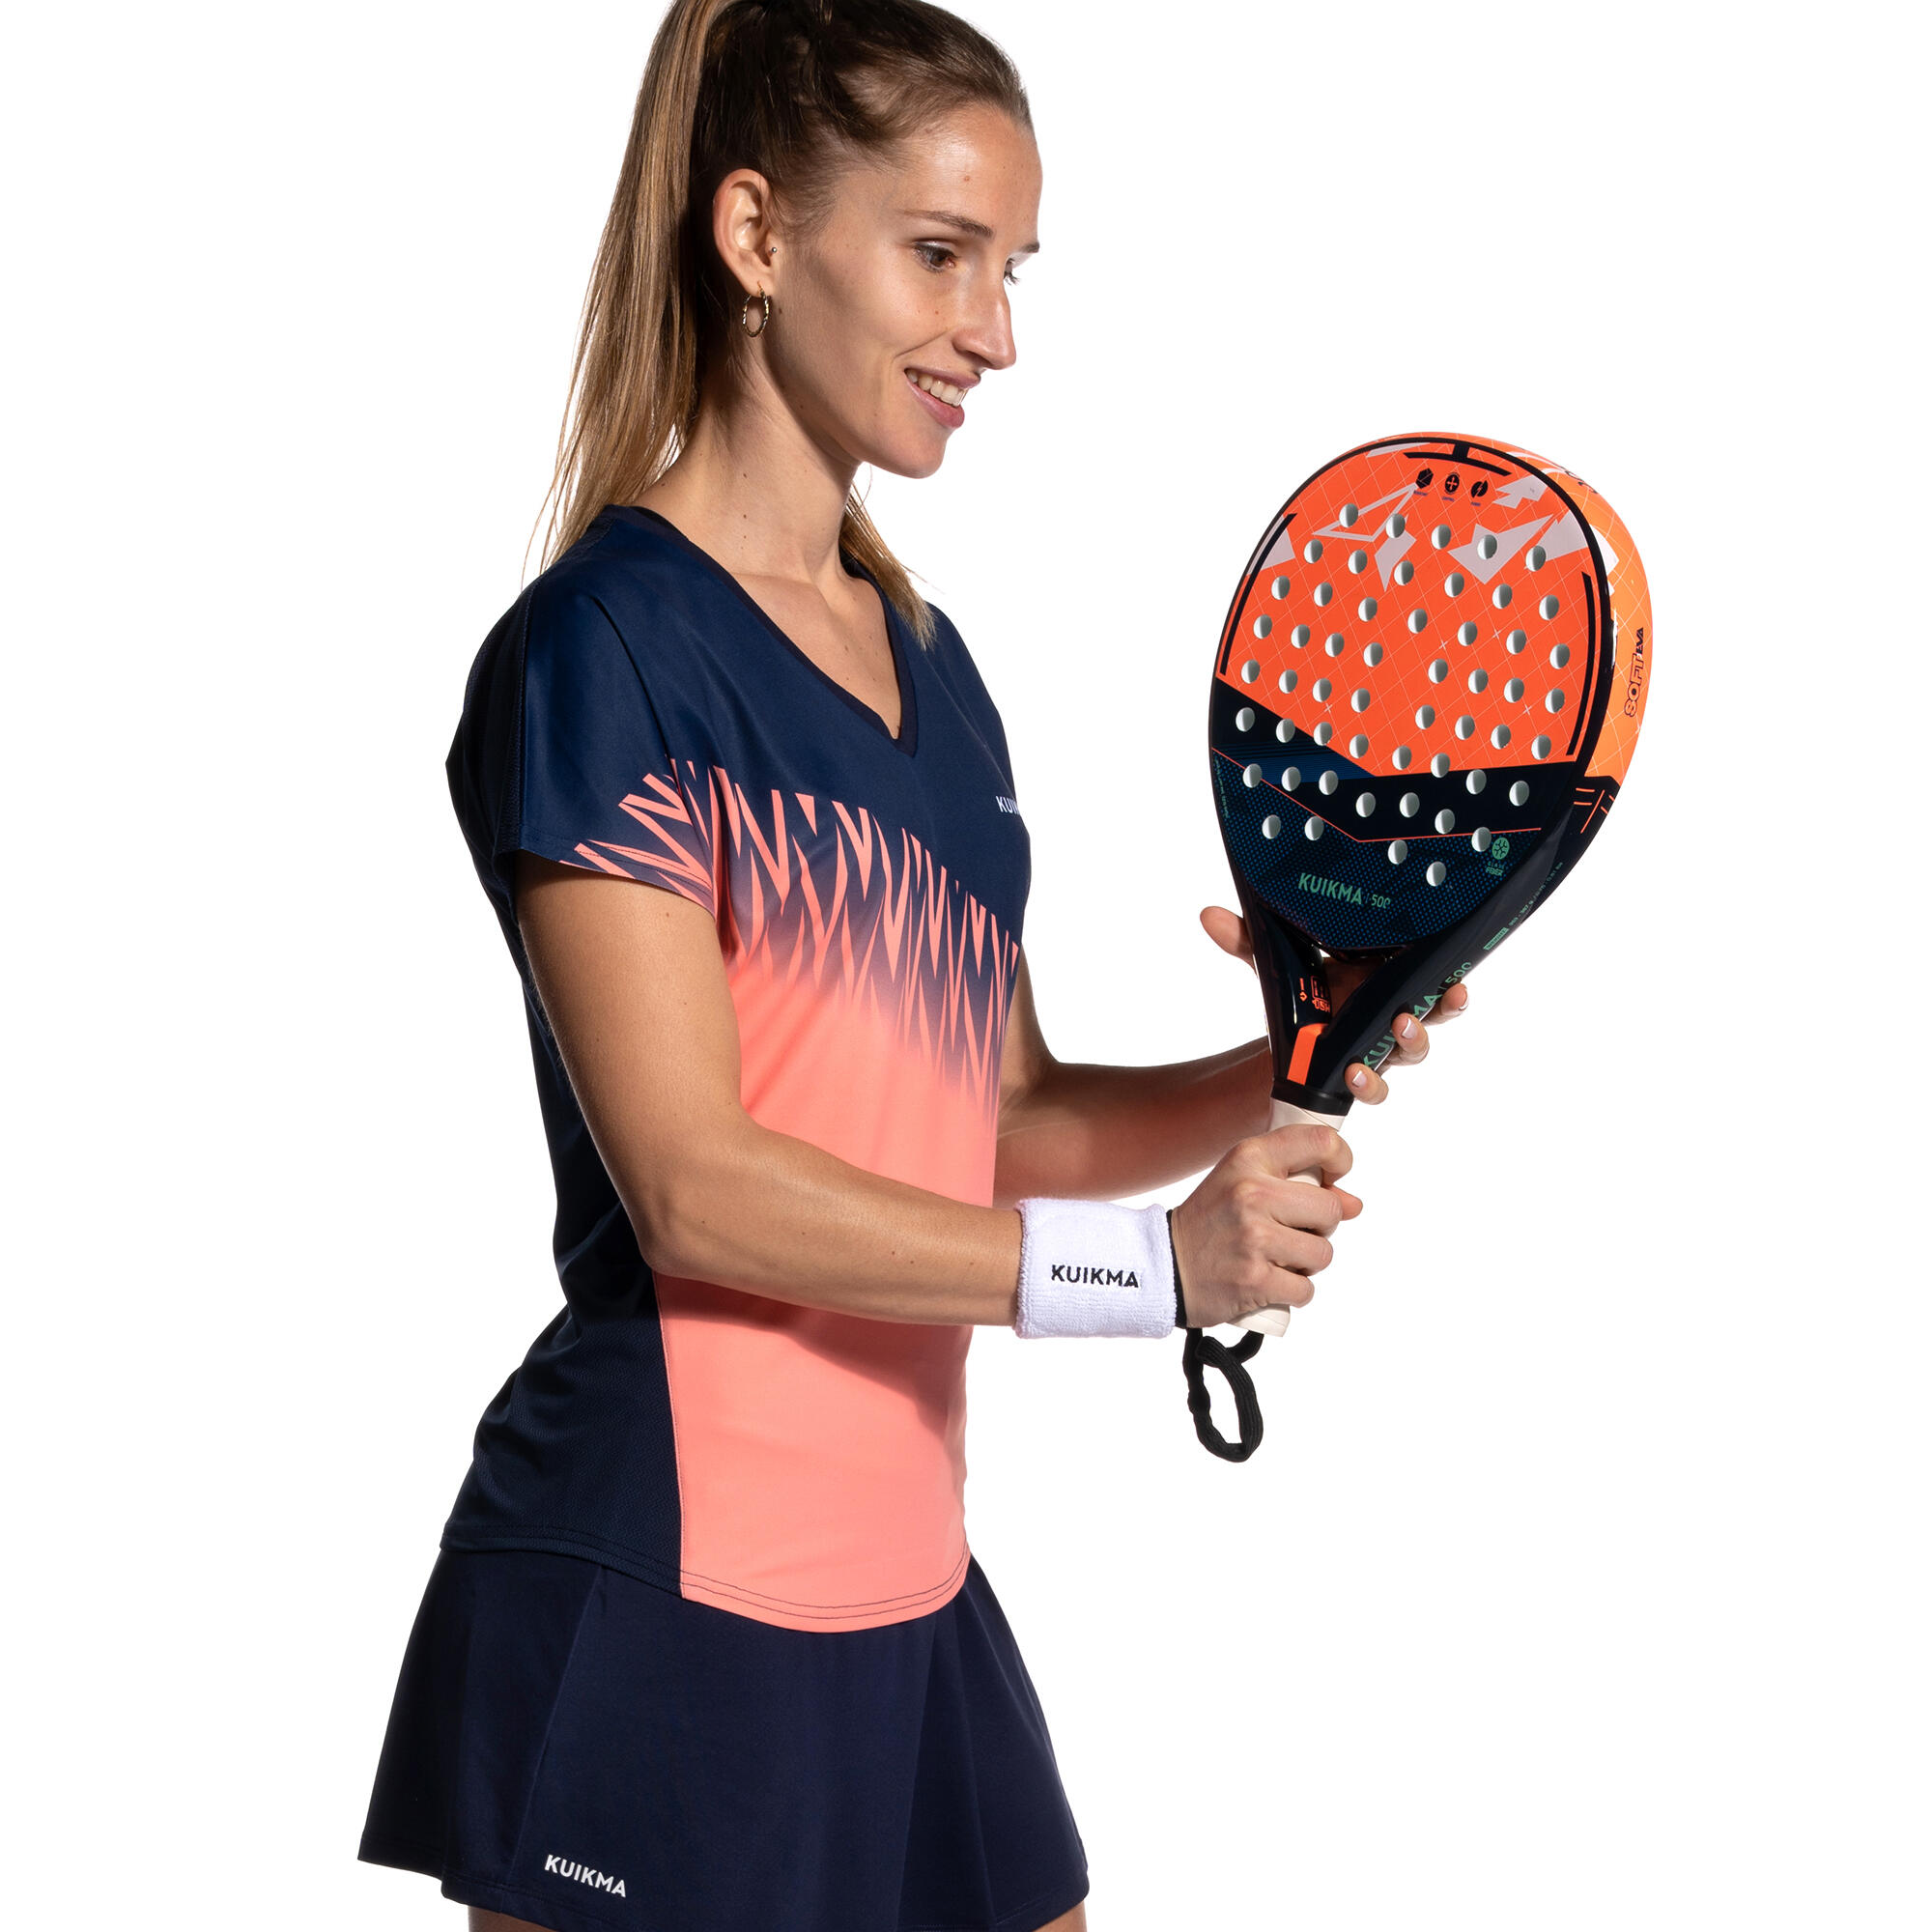 Women's Short-Sleeved Breathable Padel T-Shirt 500 - Blue/Coral 4/8